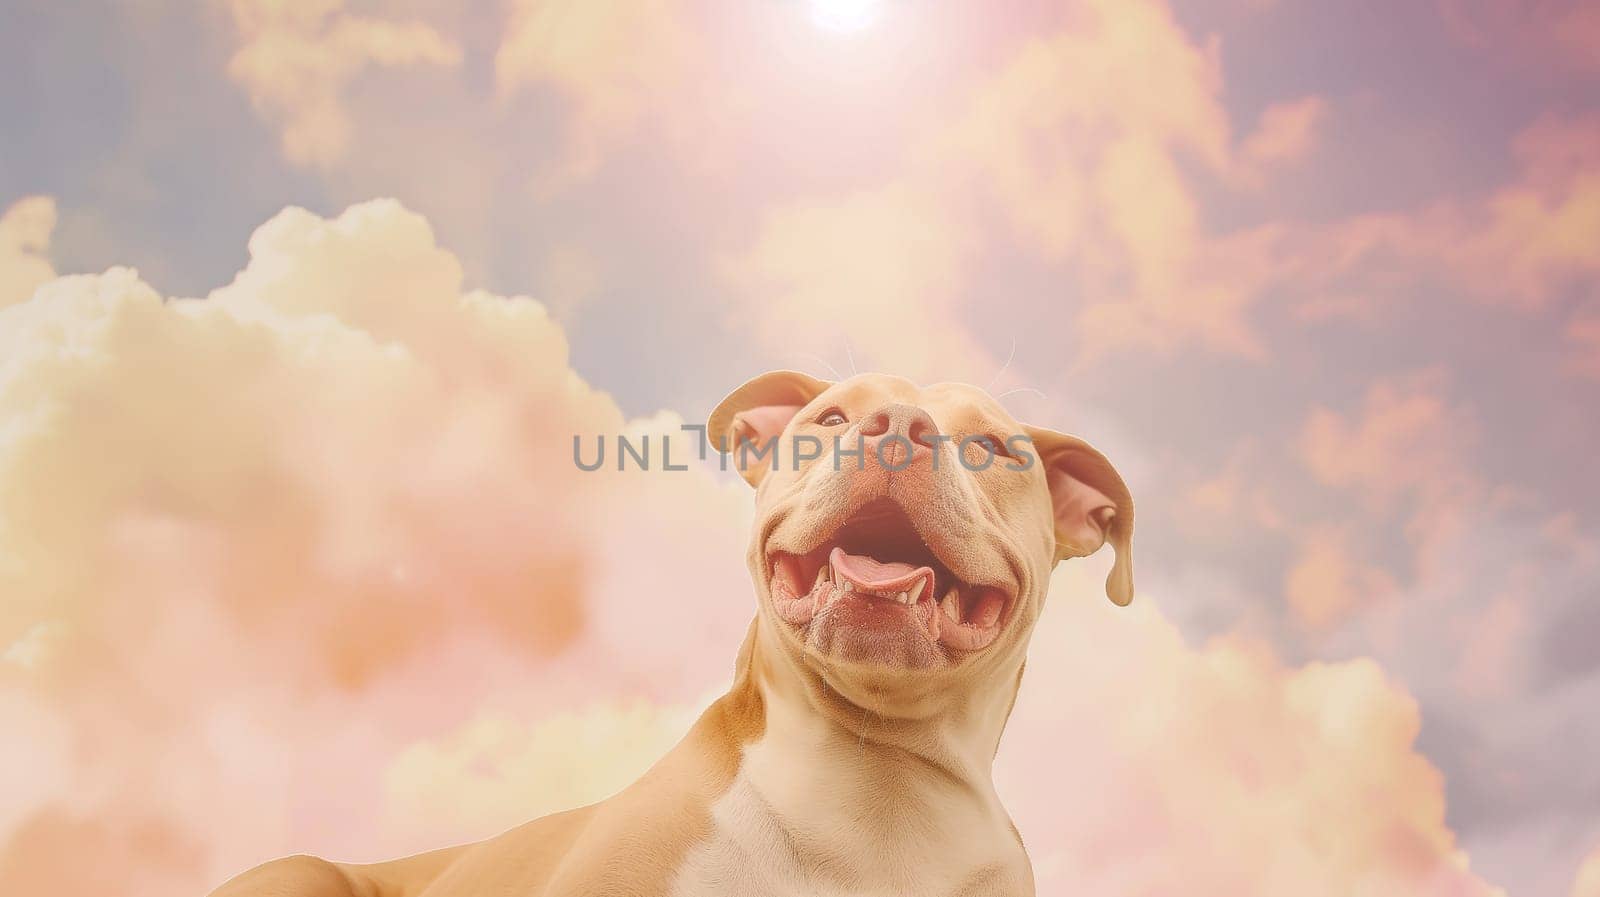 Happy dog smiling under the bright sky with clouds on a joyful sunny day outdoors